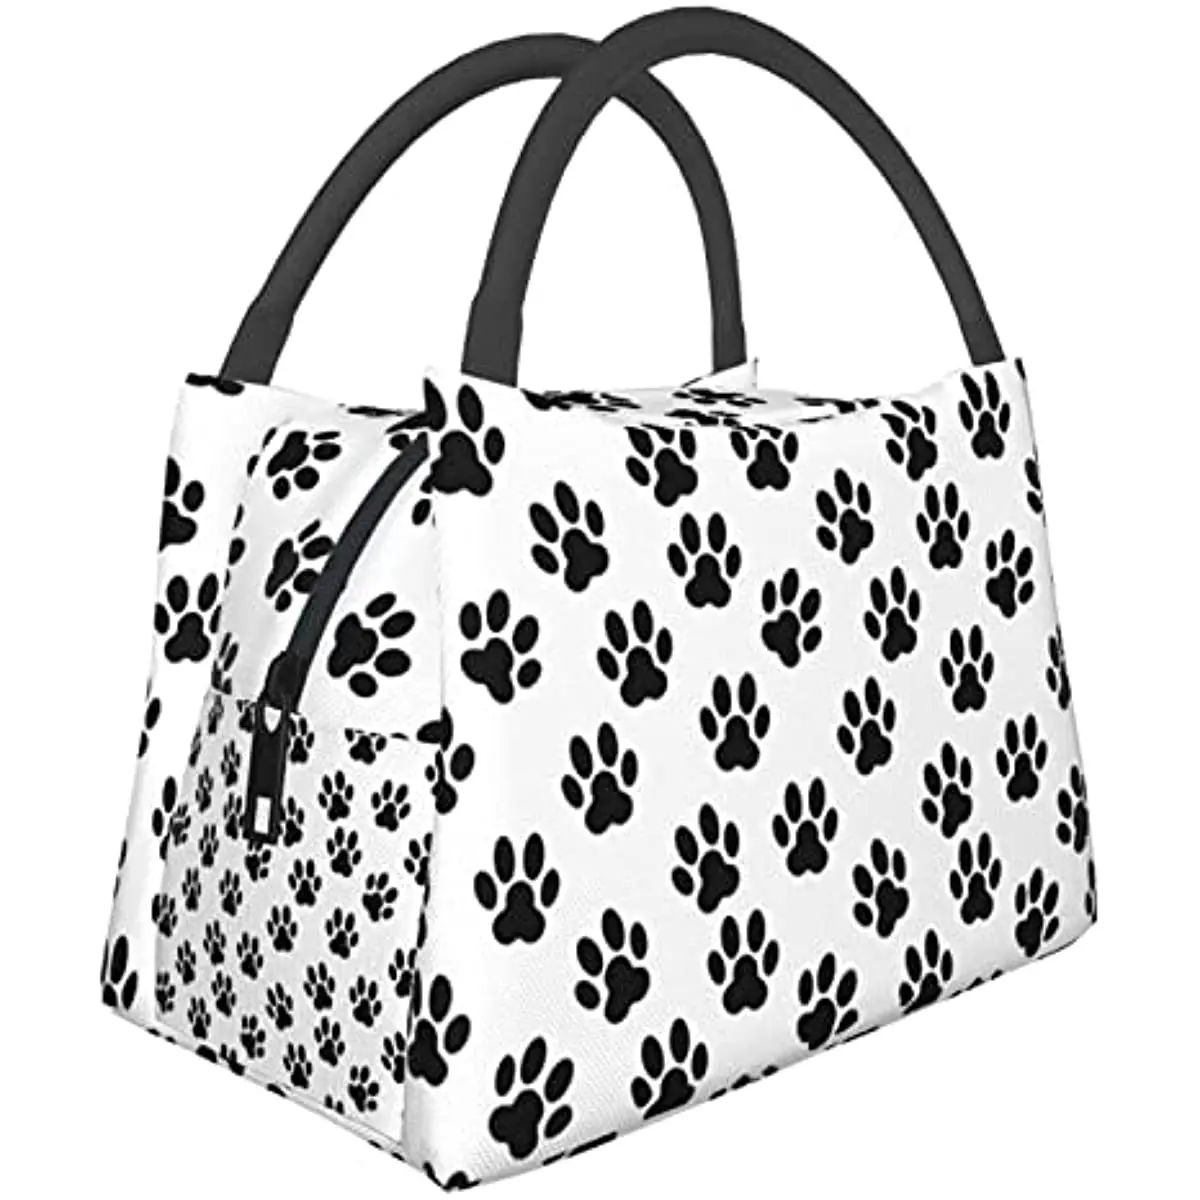 Black Dog Cat Paw Pattern Print Lunch Bag for Women Men Insulated Cooler Tote Box Handbag for Home Office Outdoor Picnic